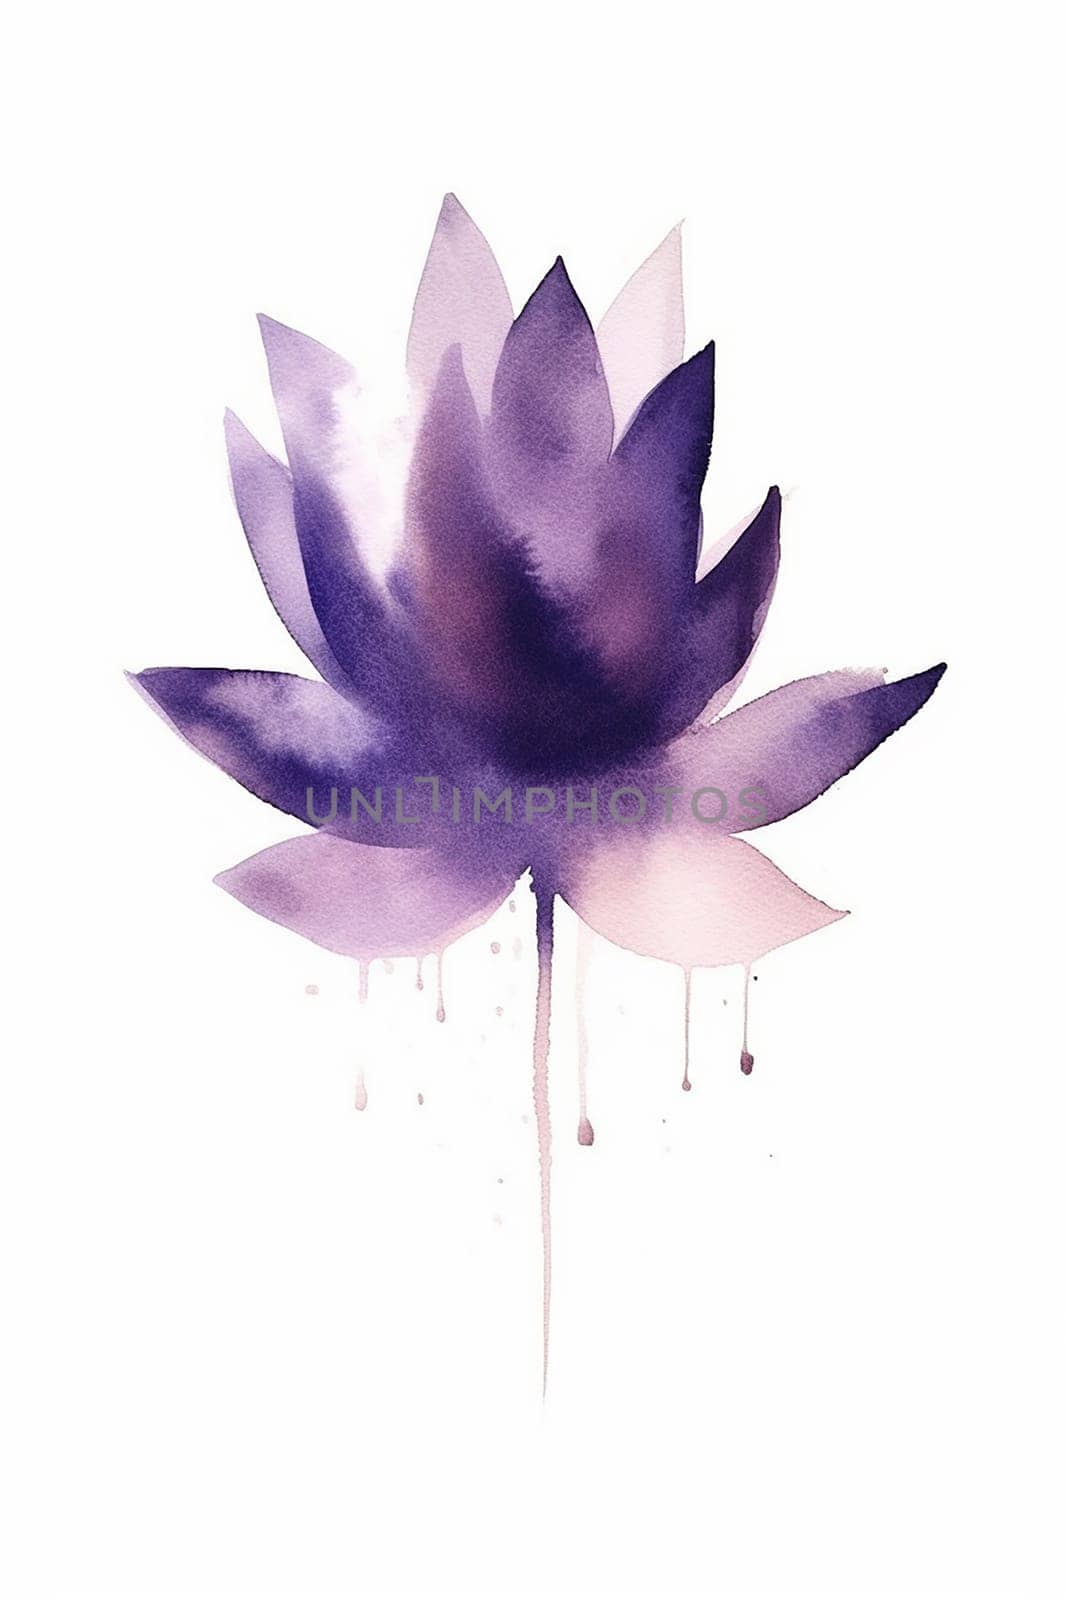 A purple watercolor painting of a stylized lotus flower with dripping paint detail.